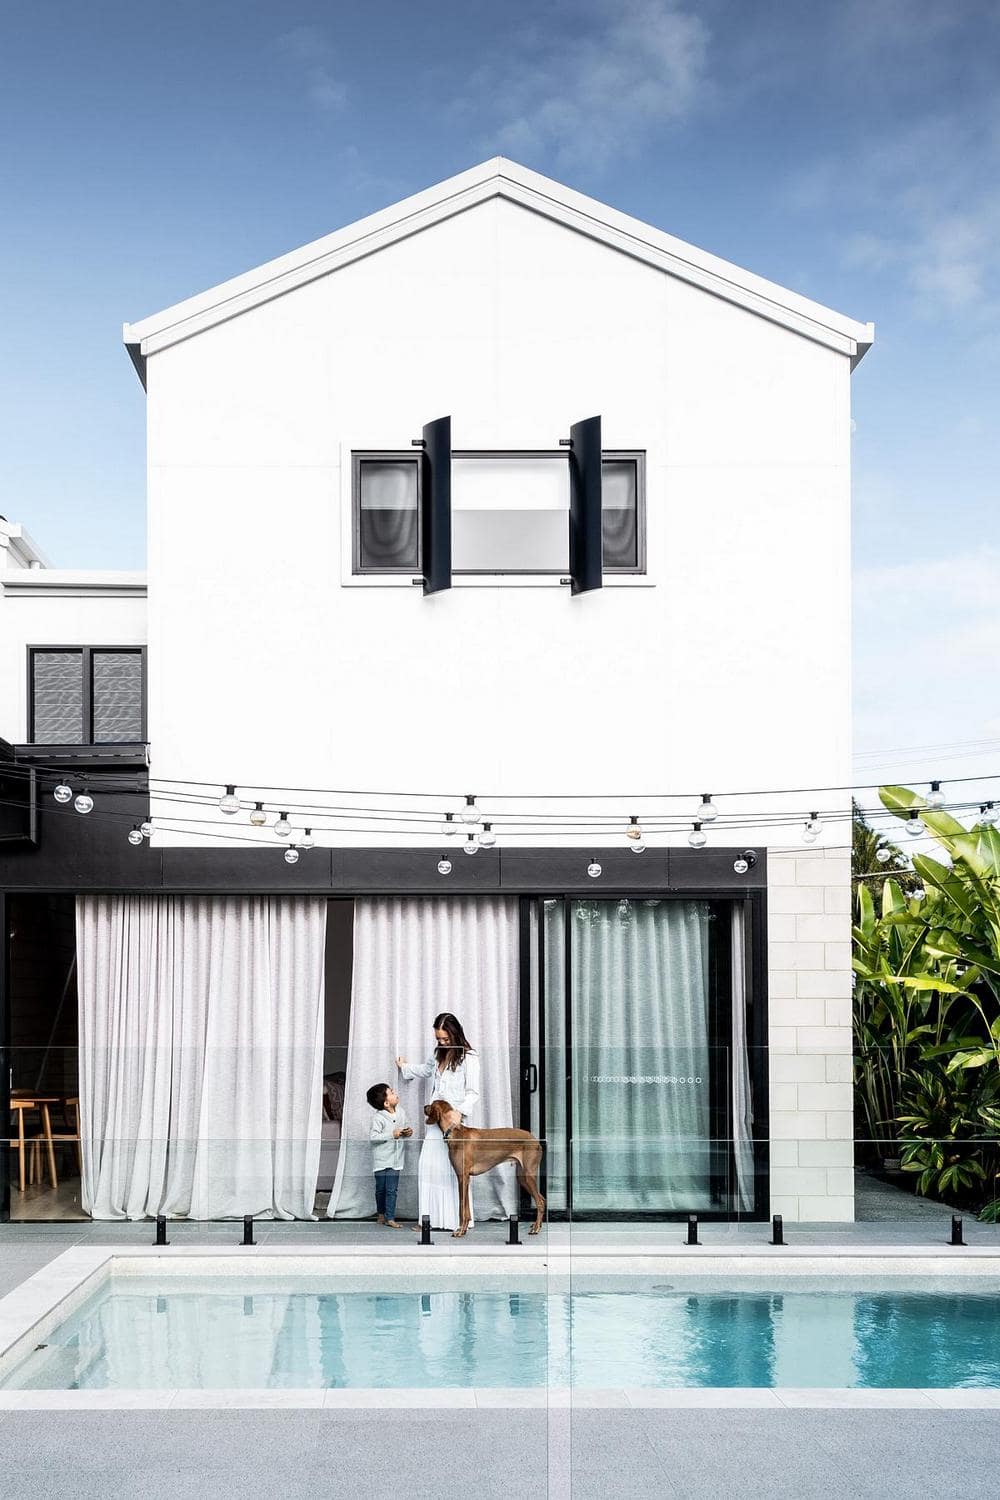 A Major Renovation to an Existing Dilapidated Single-Storey Brick House